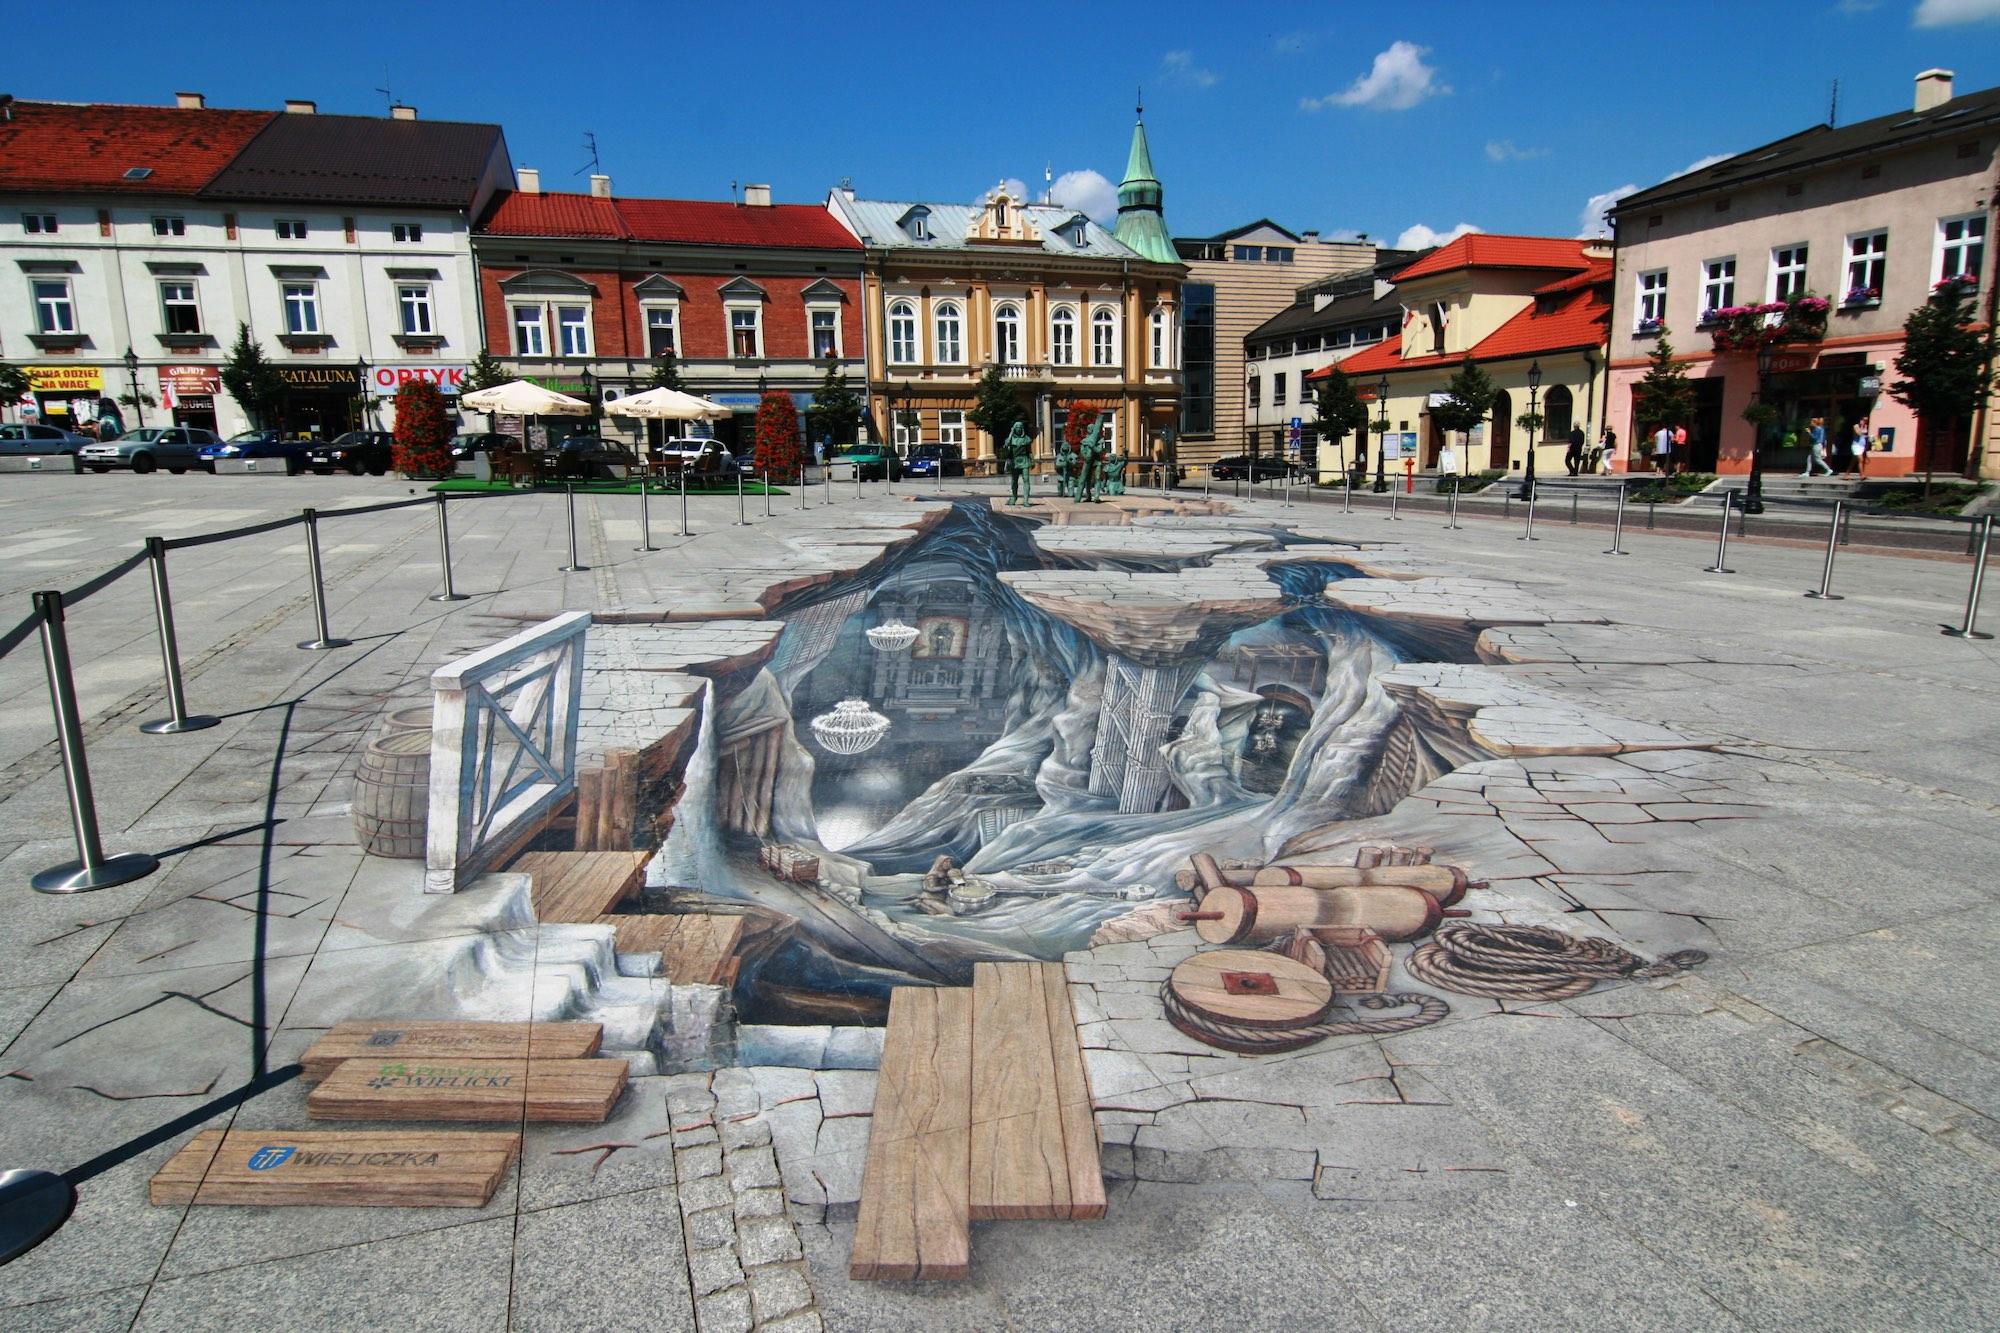 The trompe l'oeil painting in Wieliczka's Market Square gives the illusion of "peering" into the salt mine  below. – © Happa / Wikimedia Foundation